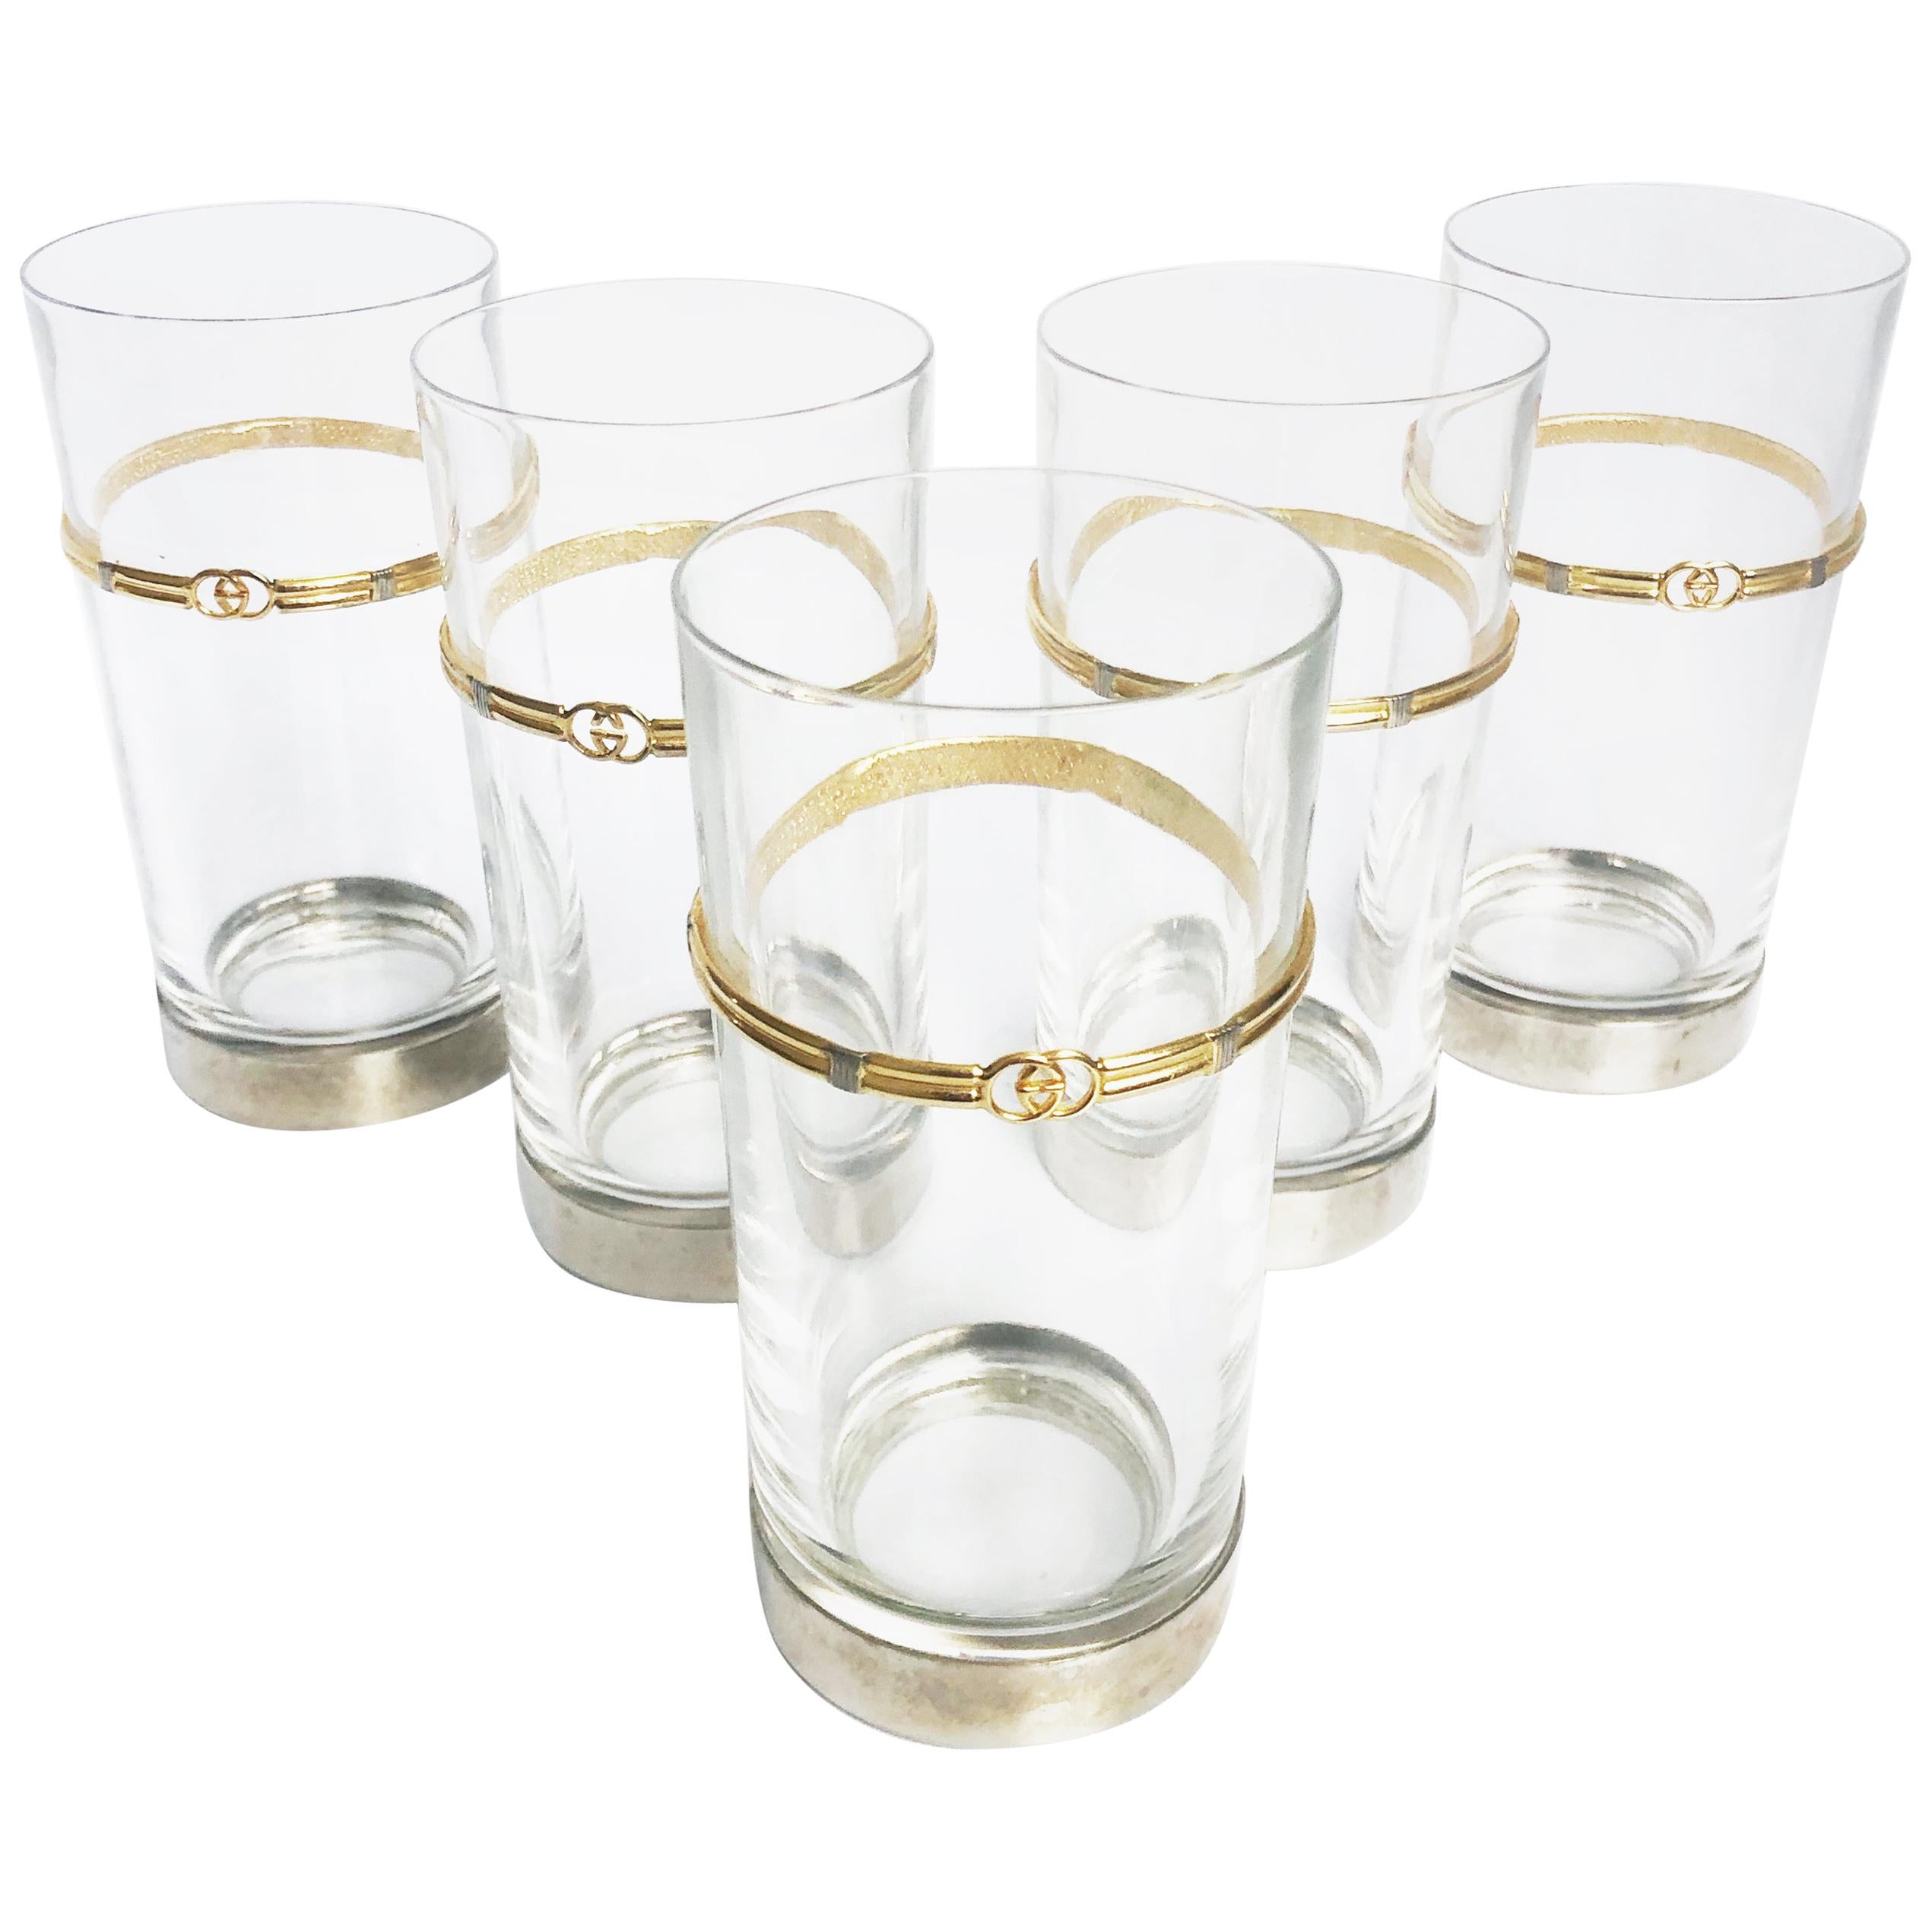 Gucci Goblet - 7 For Sale on 1stDibs  gucci wine glass, gucci drinking  glasses, gucci wine glasses